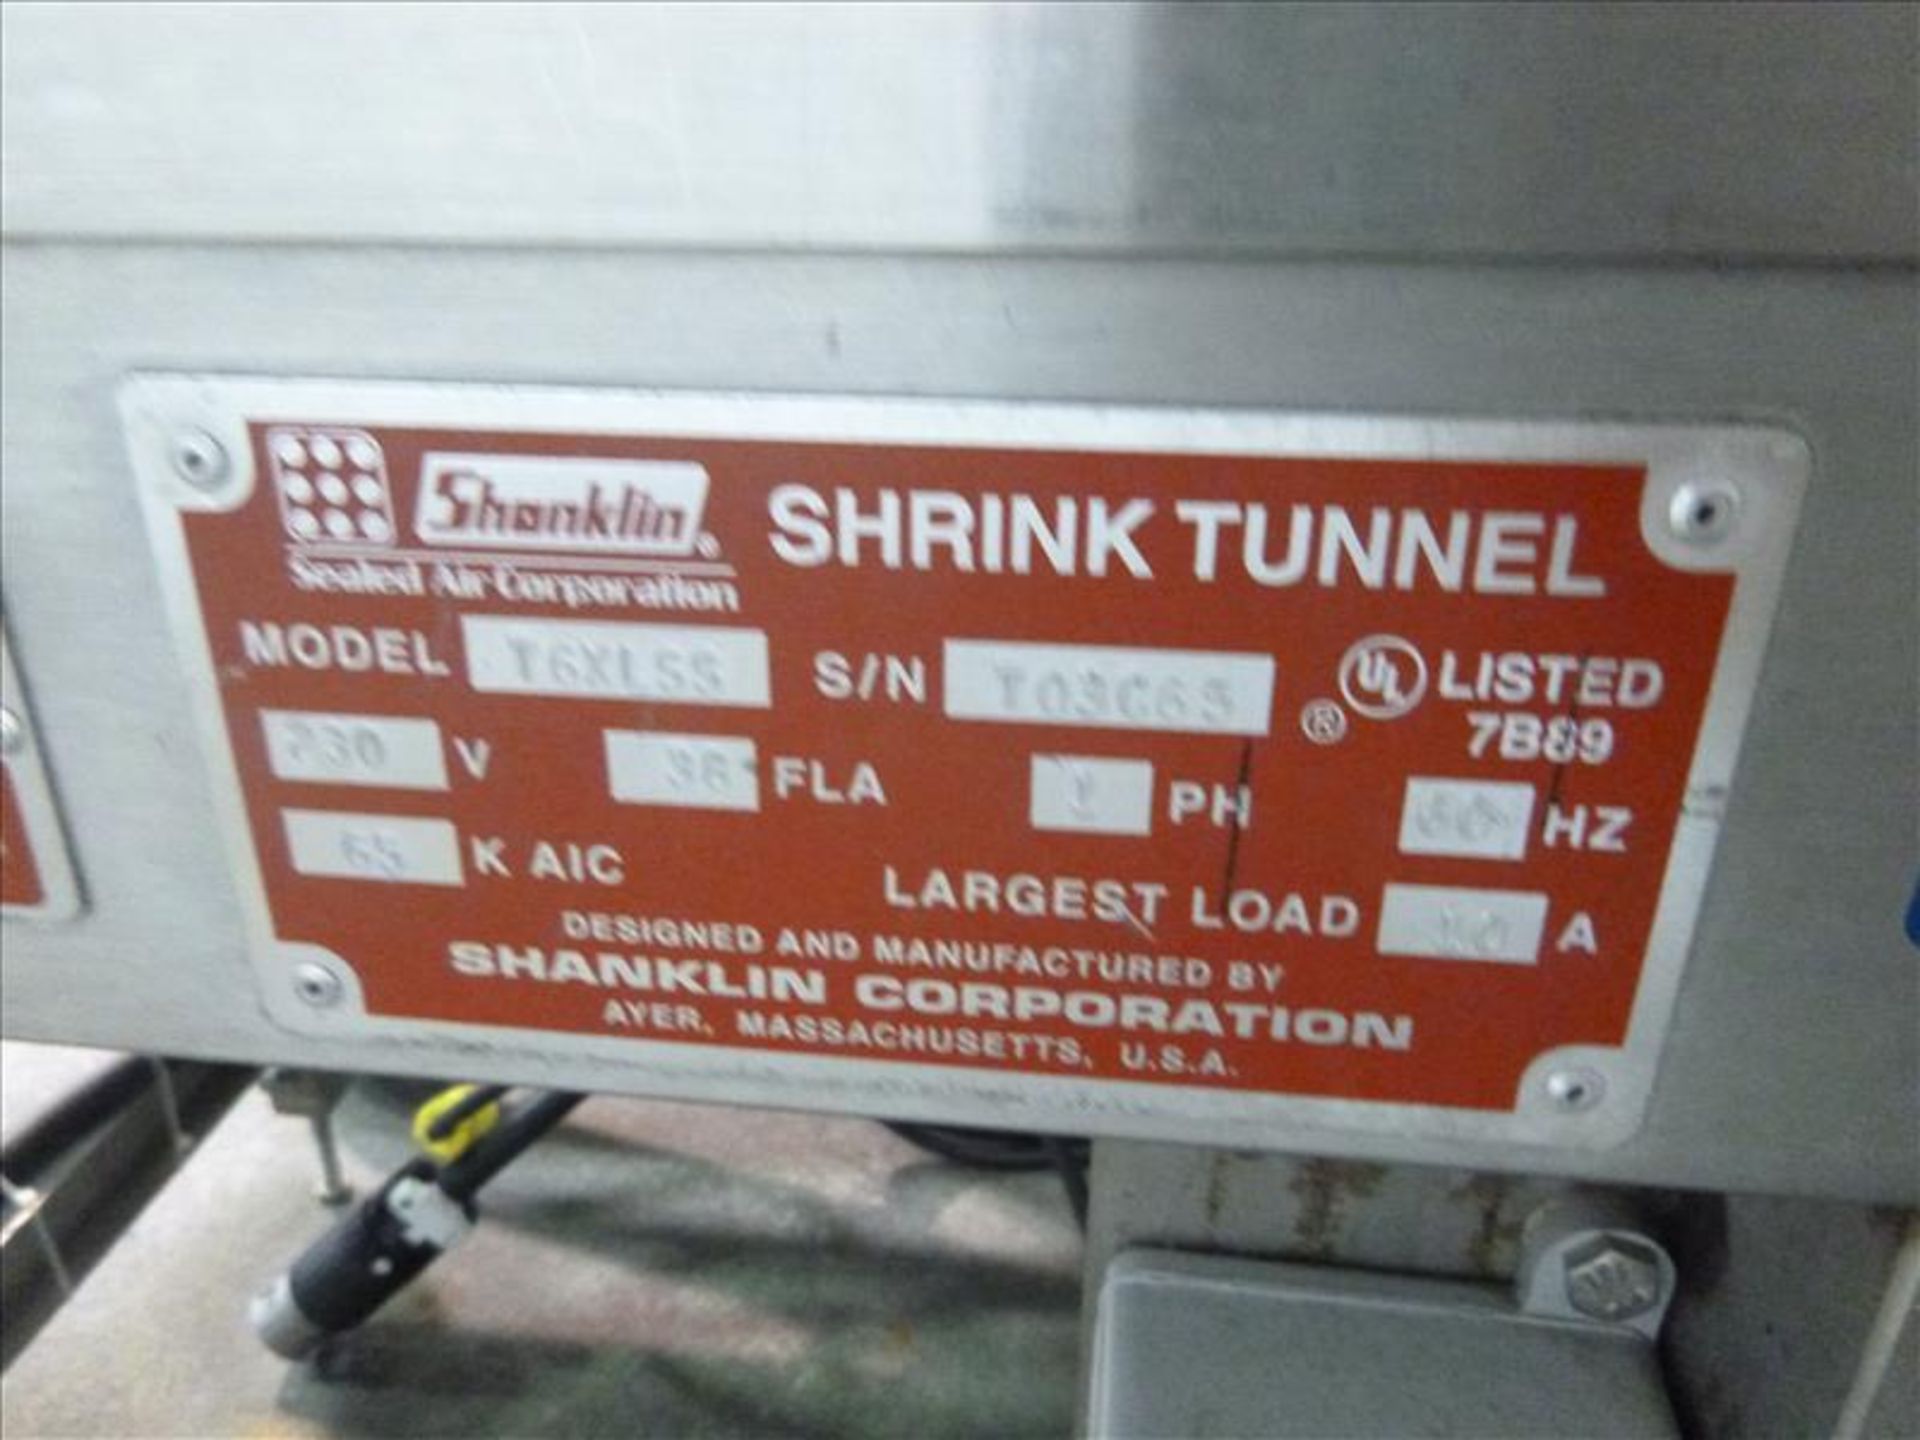 Shanklin Shrink Tunnel mod. T6XLSS ser. no. T03C65 (Located at 140 Panet Road, Winnipeg, MA) - Image 3 of 3